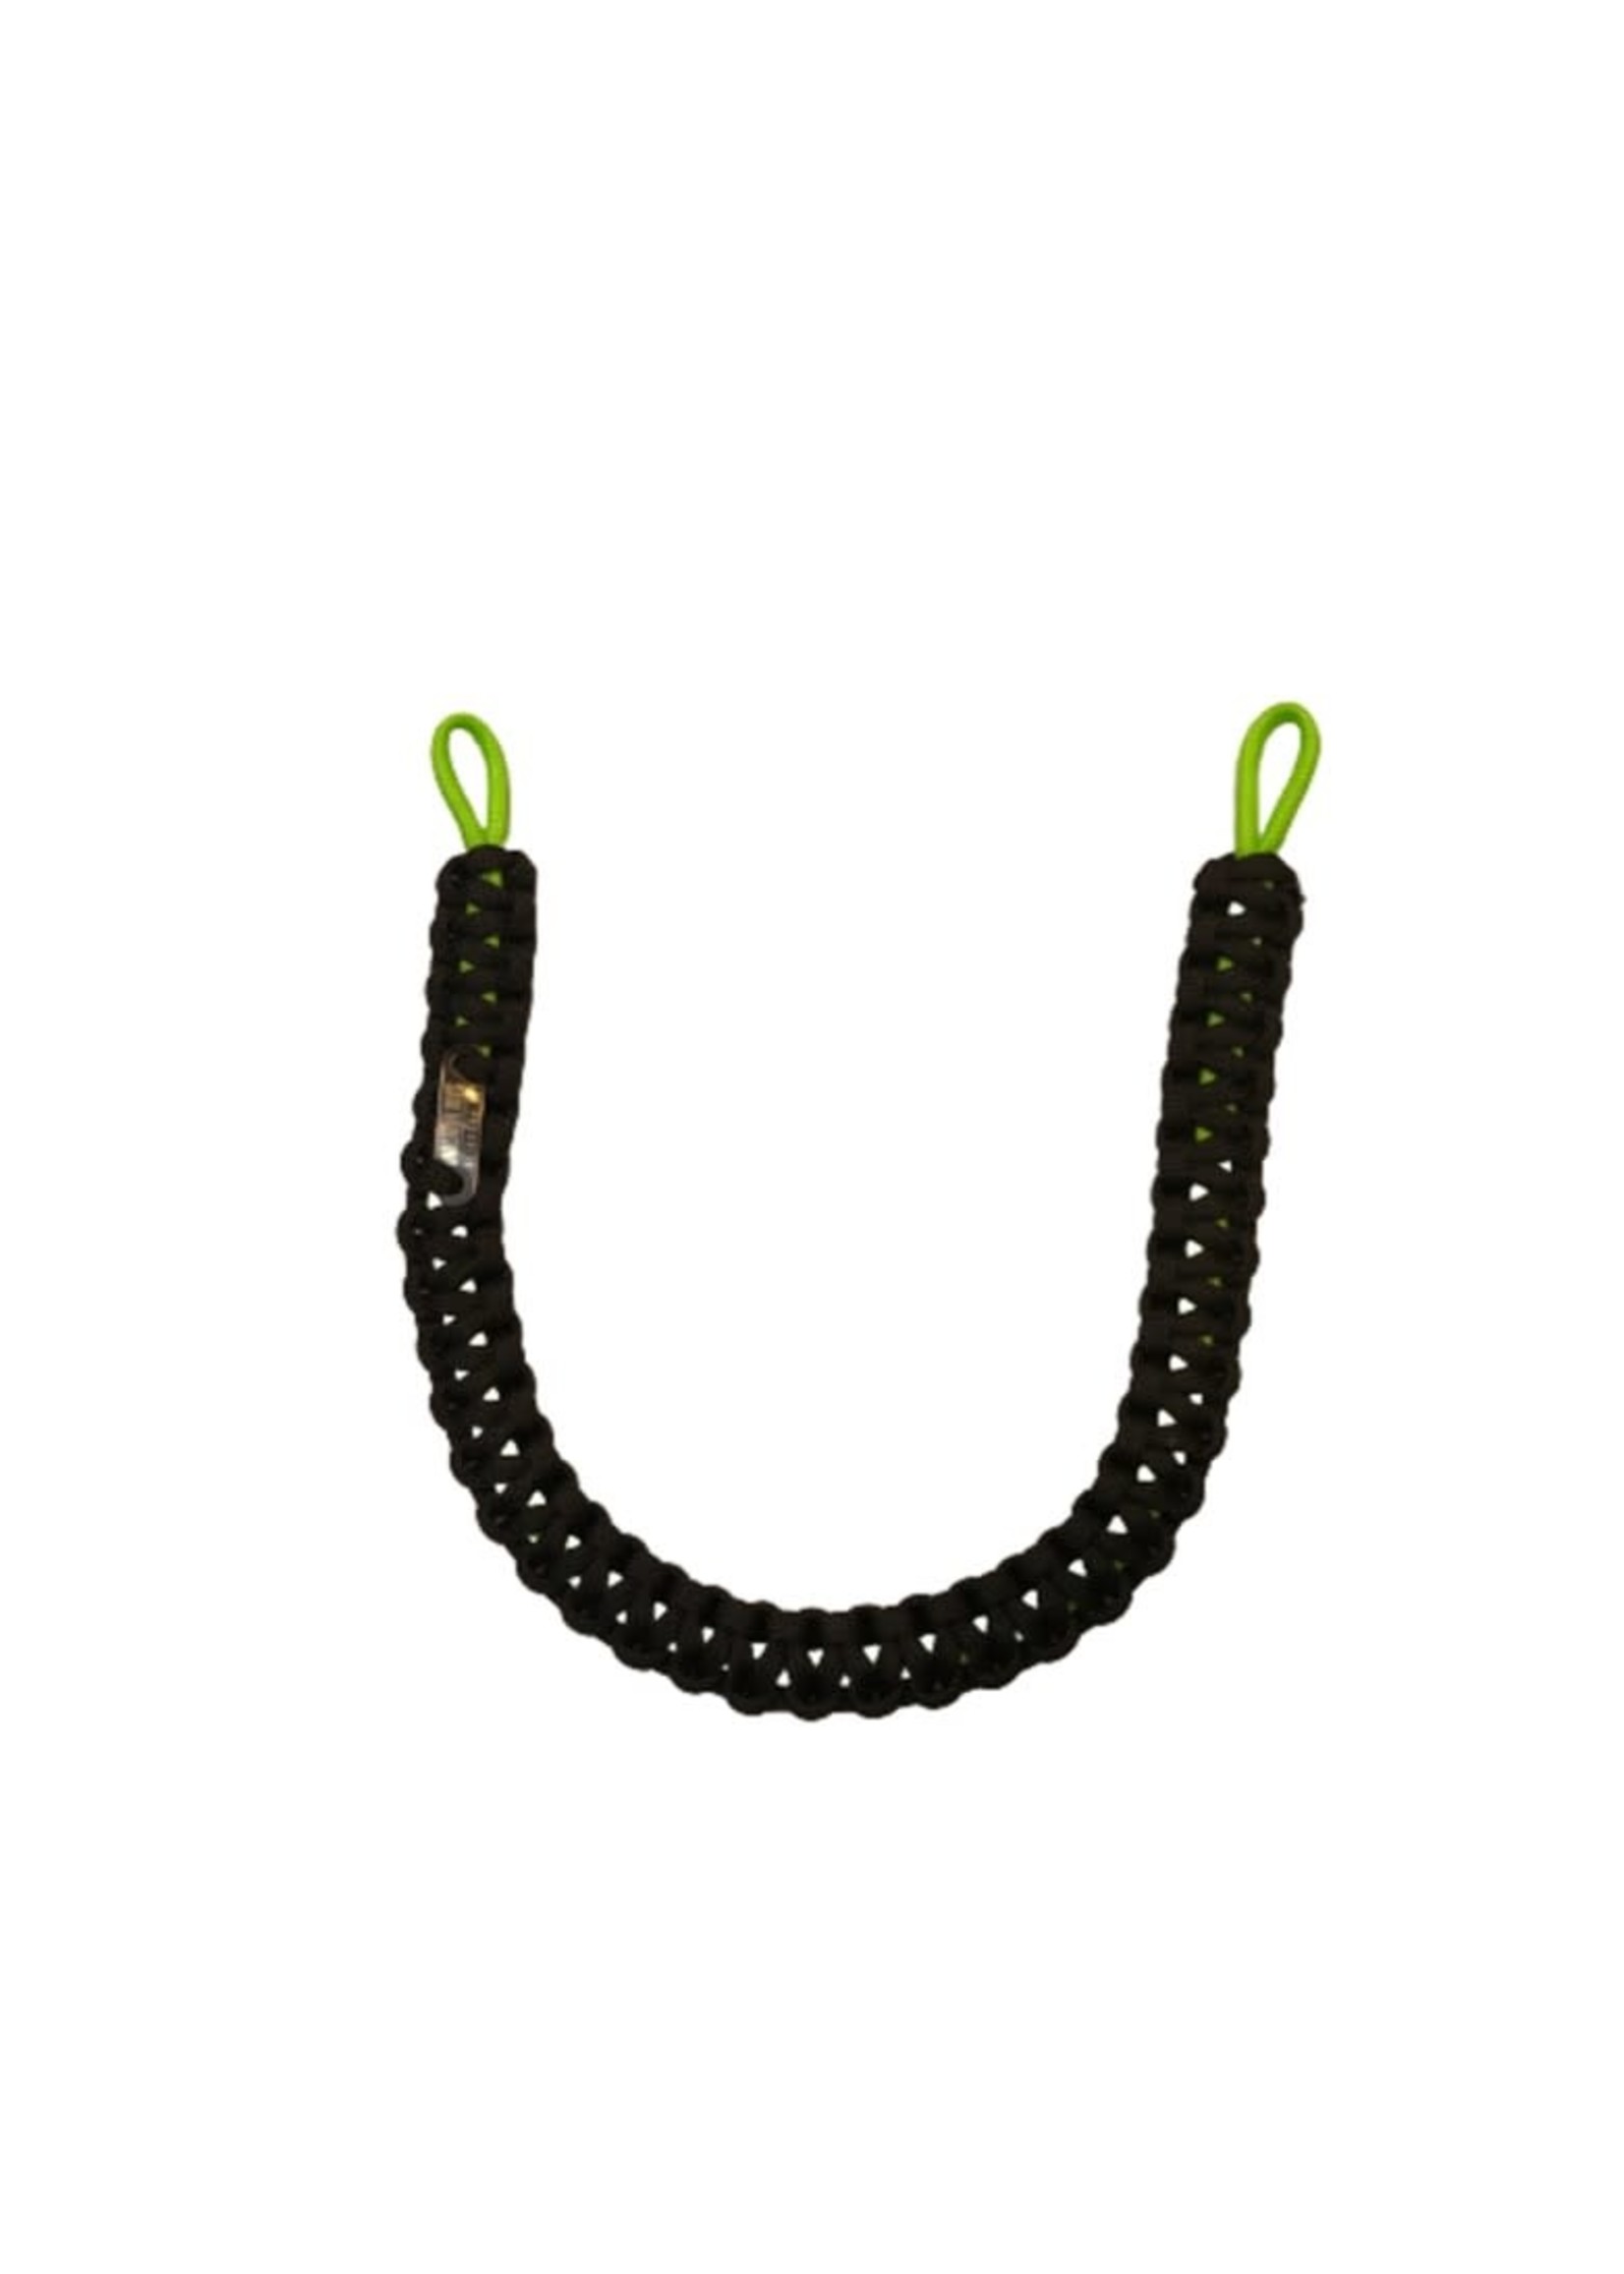 Les Produits Sam Hunting Bow Sling Black and fluo green